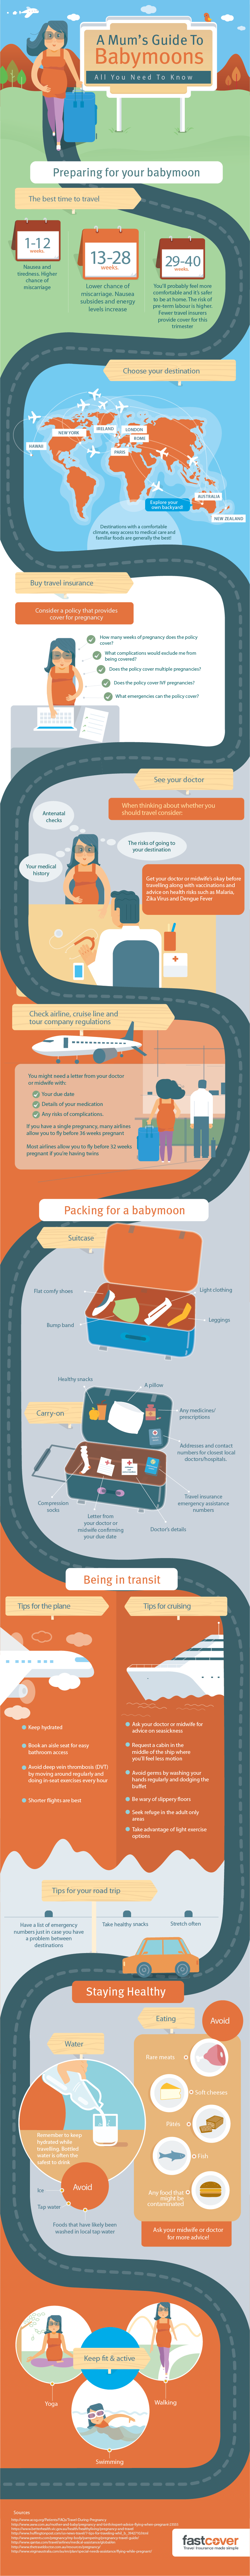 Fast Cover travel insurances pregnant travel infographic provides travel tips for your babymoon.